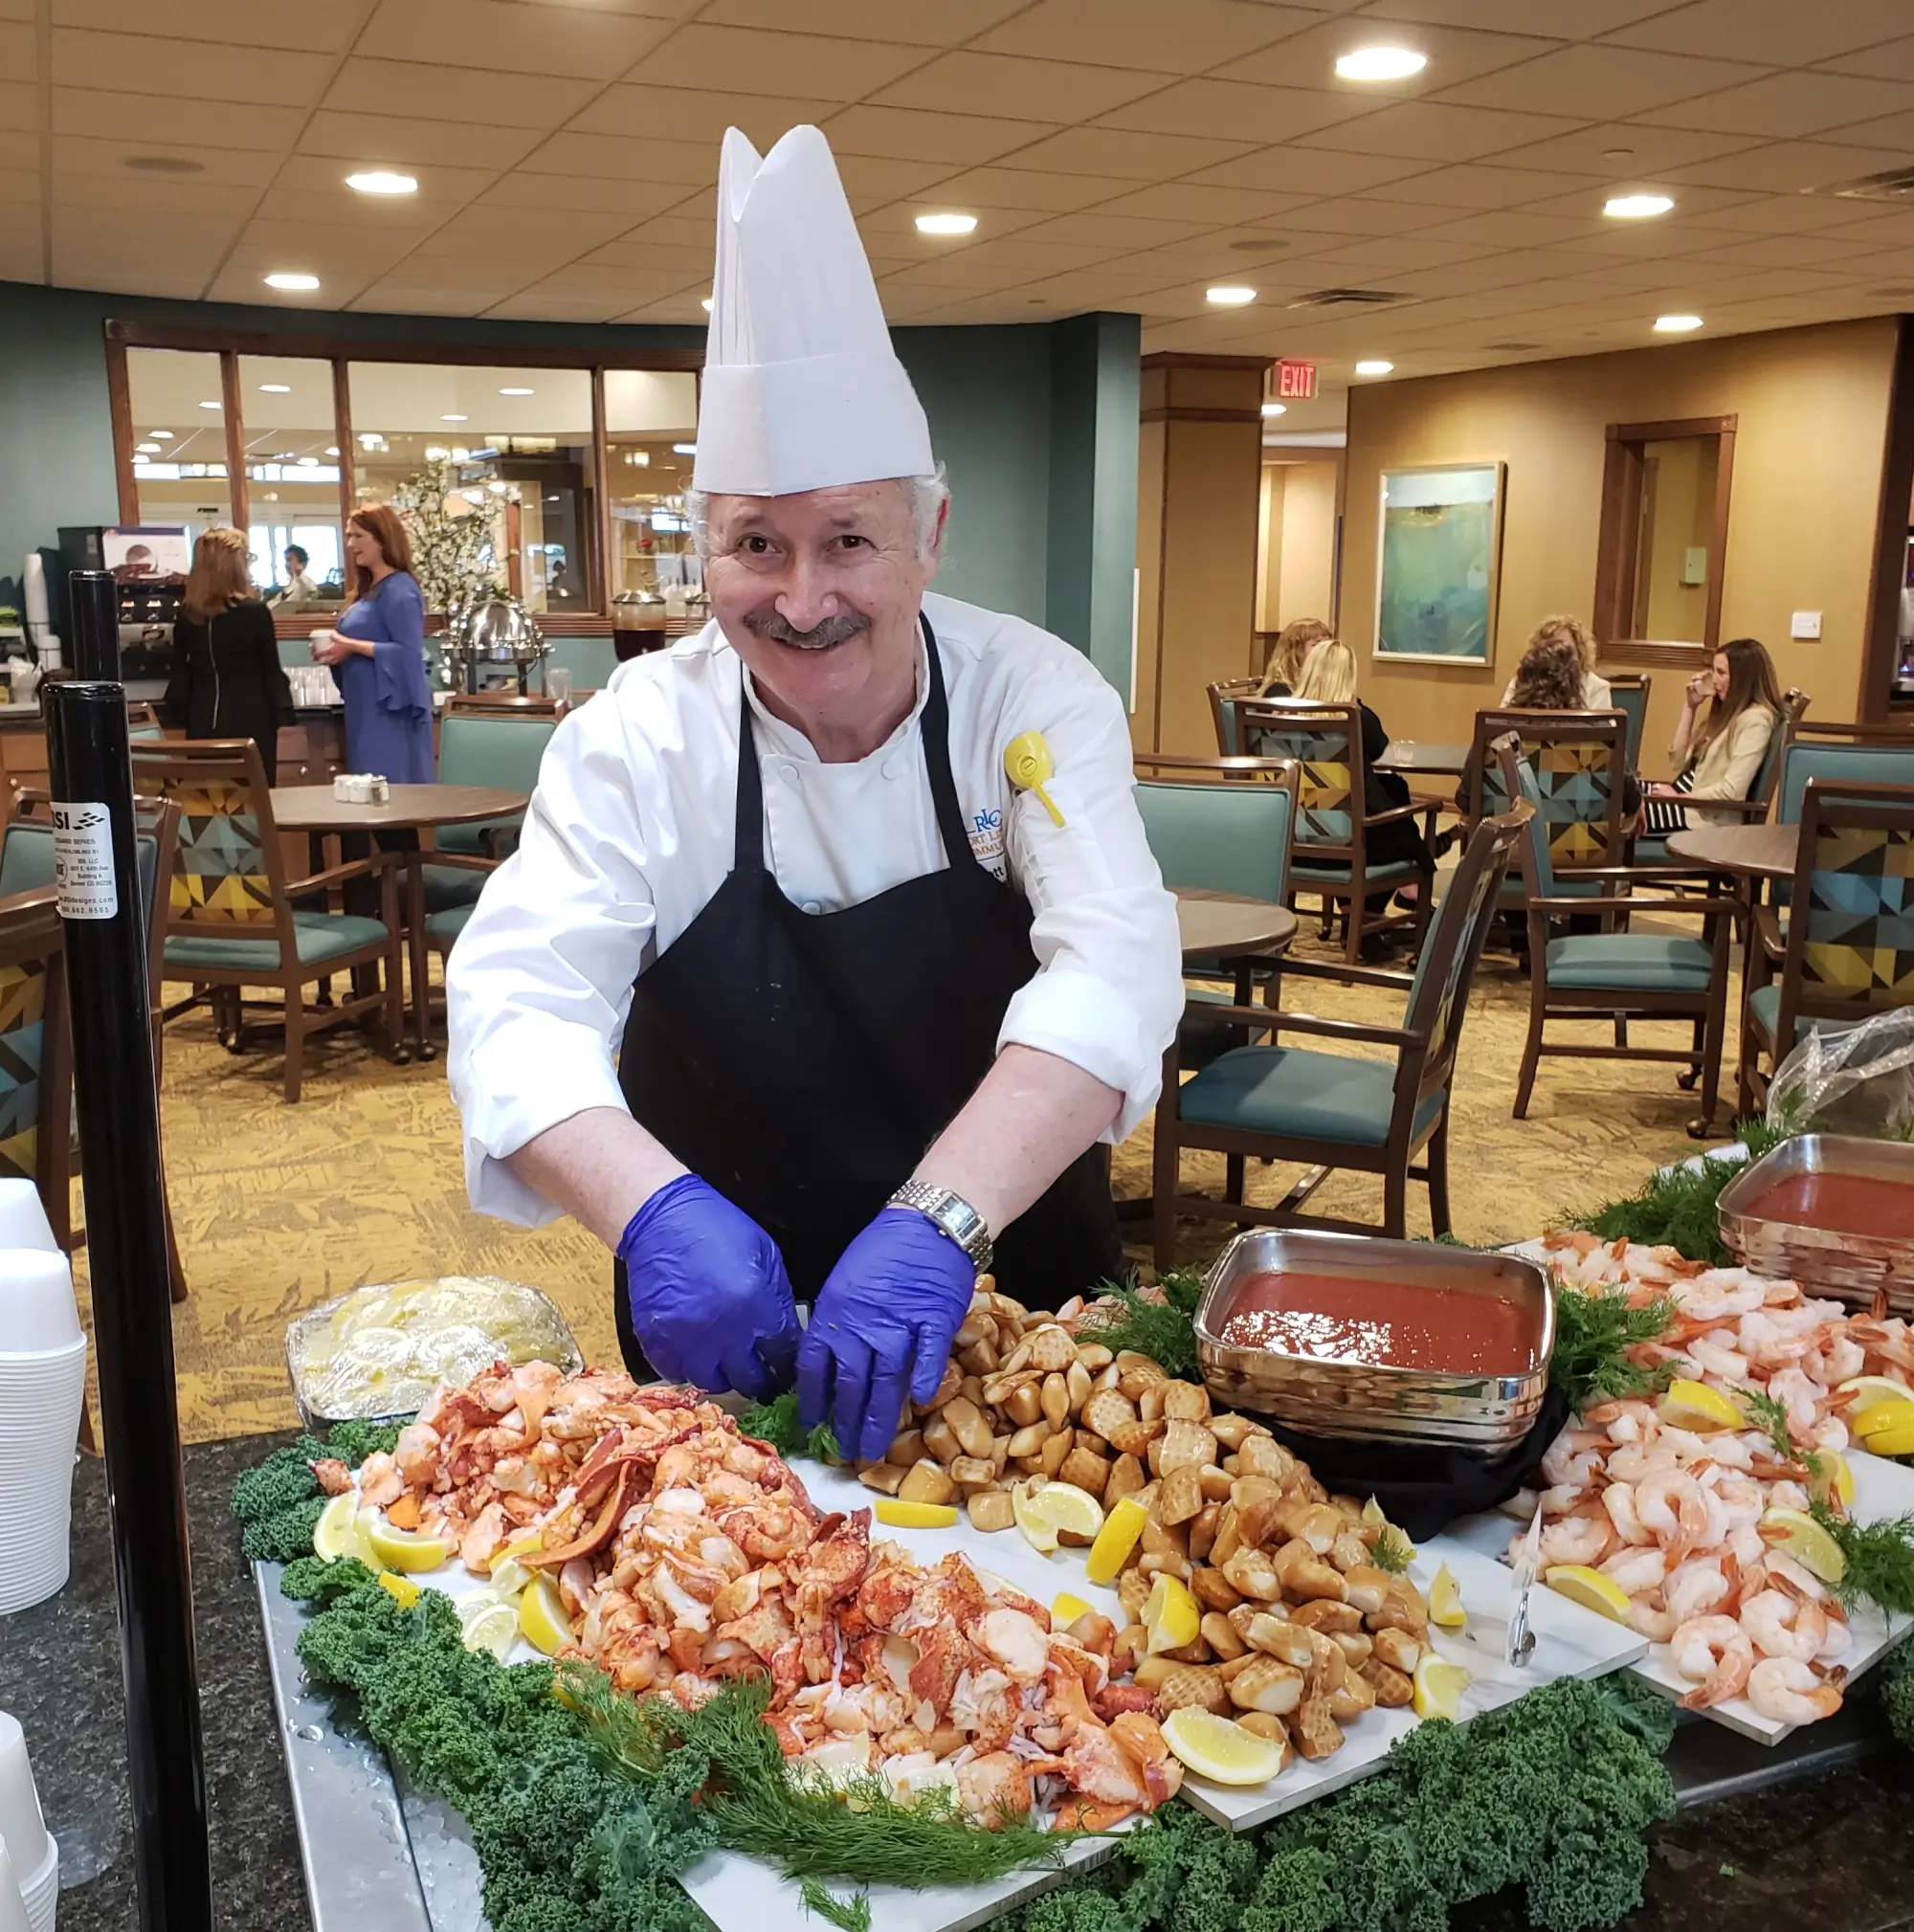 RLC chef putting out buffet meal